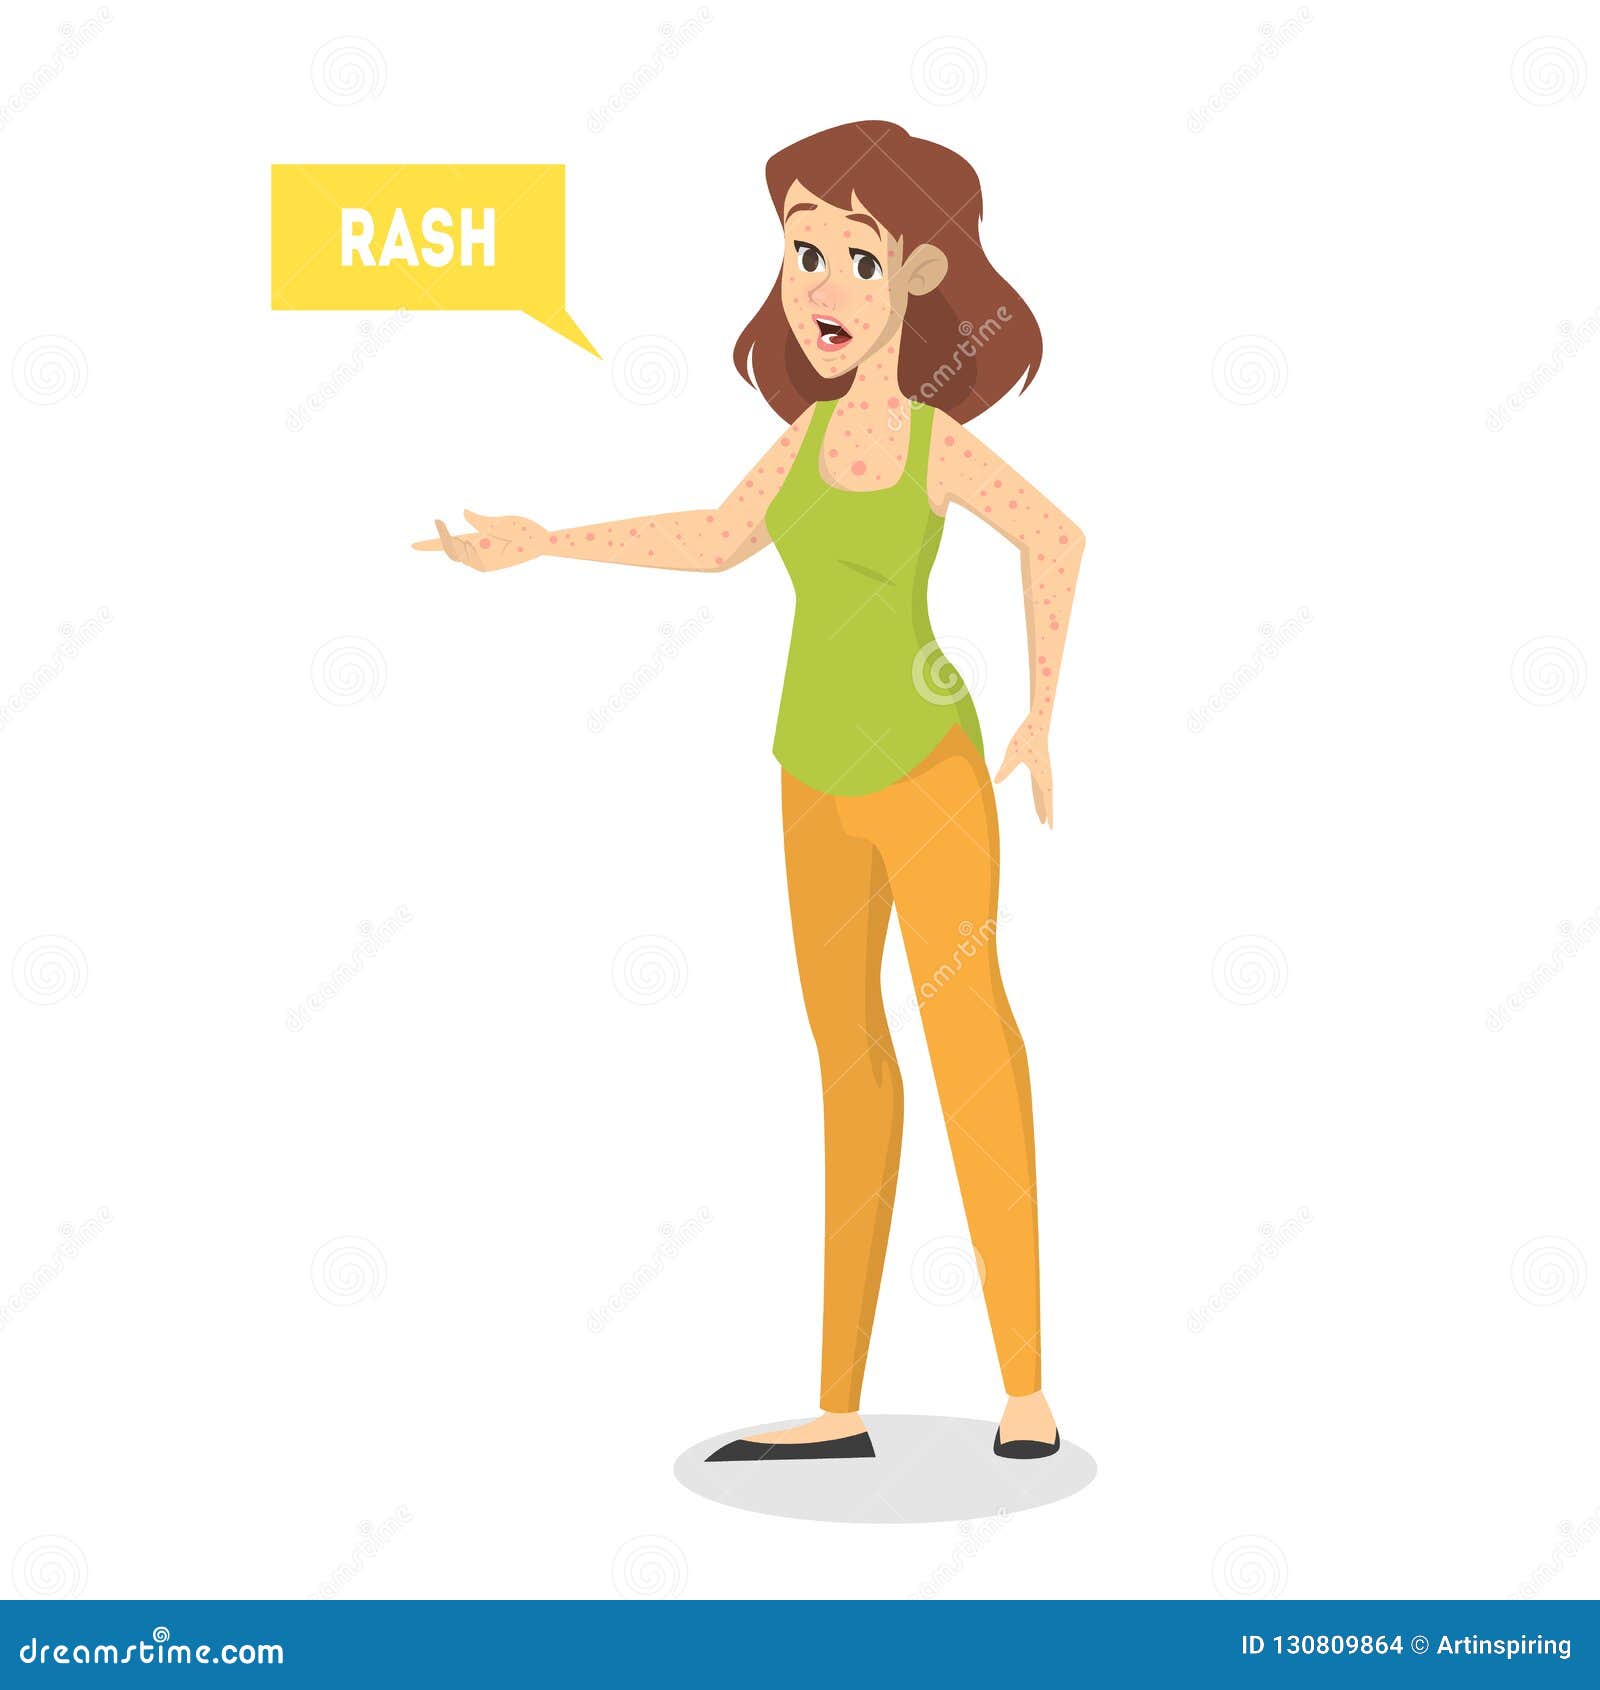 Woman with skin full of rash. Dermatology disease and inflammation. Young person with problems. Idea of skincare. Isolated vector illustration in cartoon style